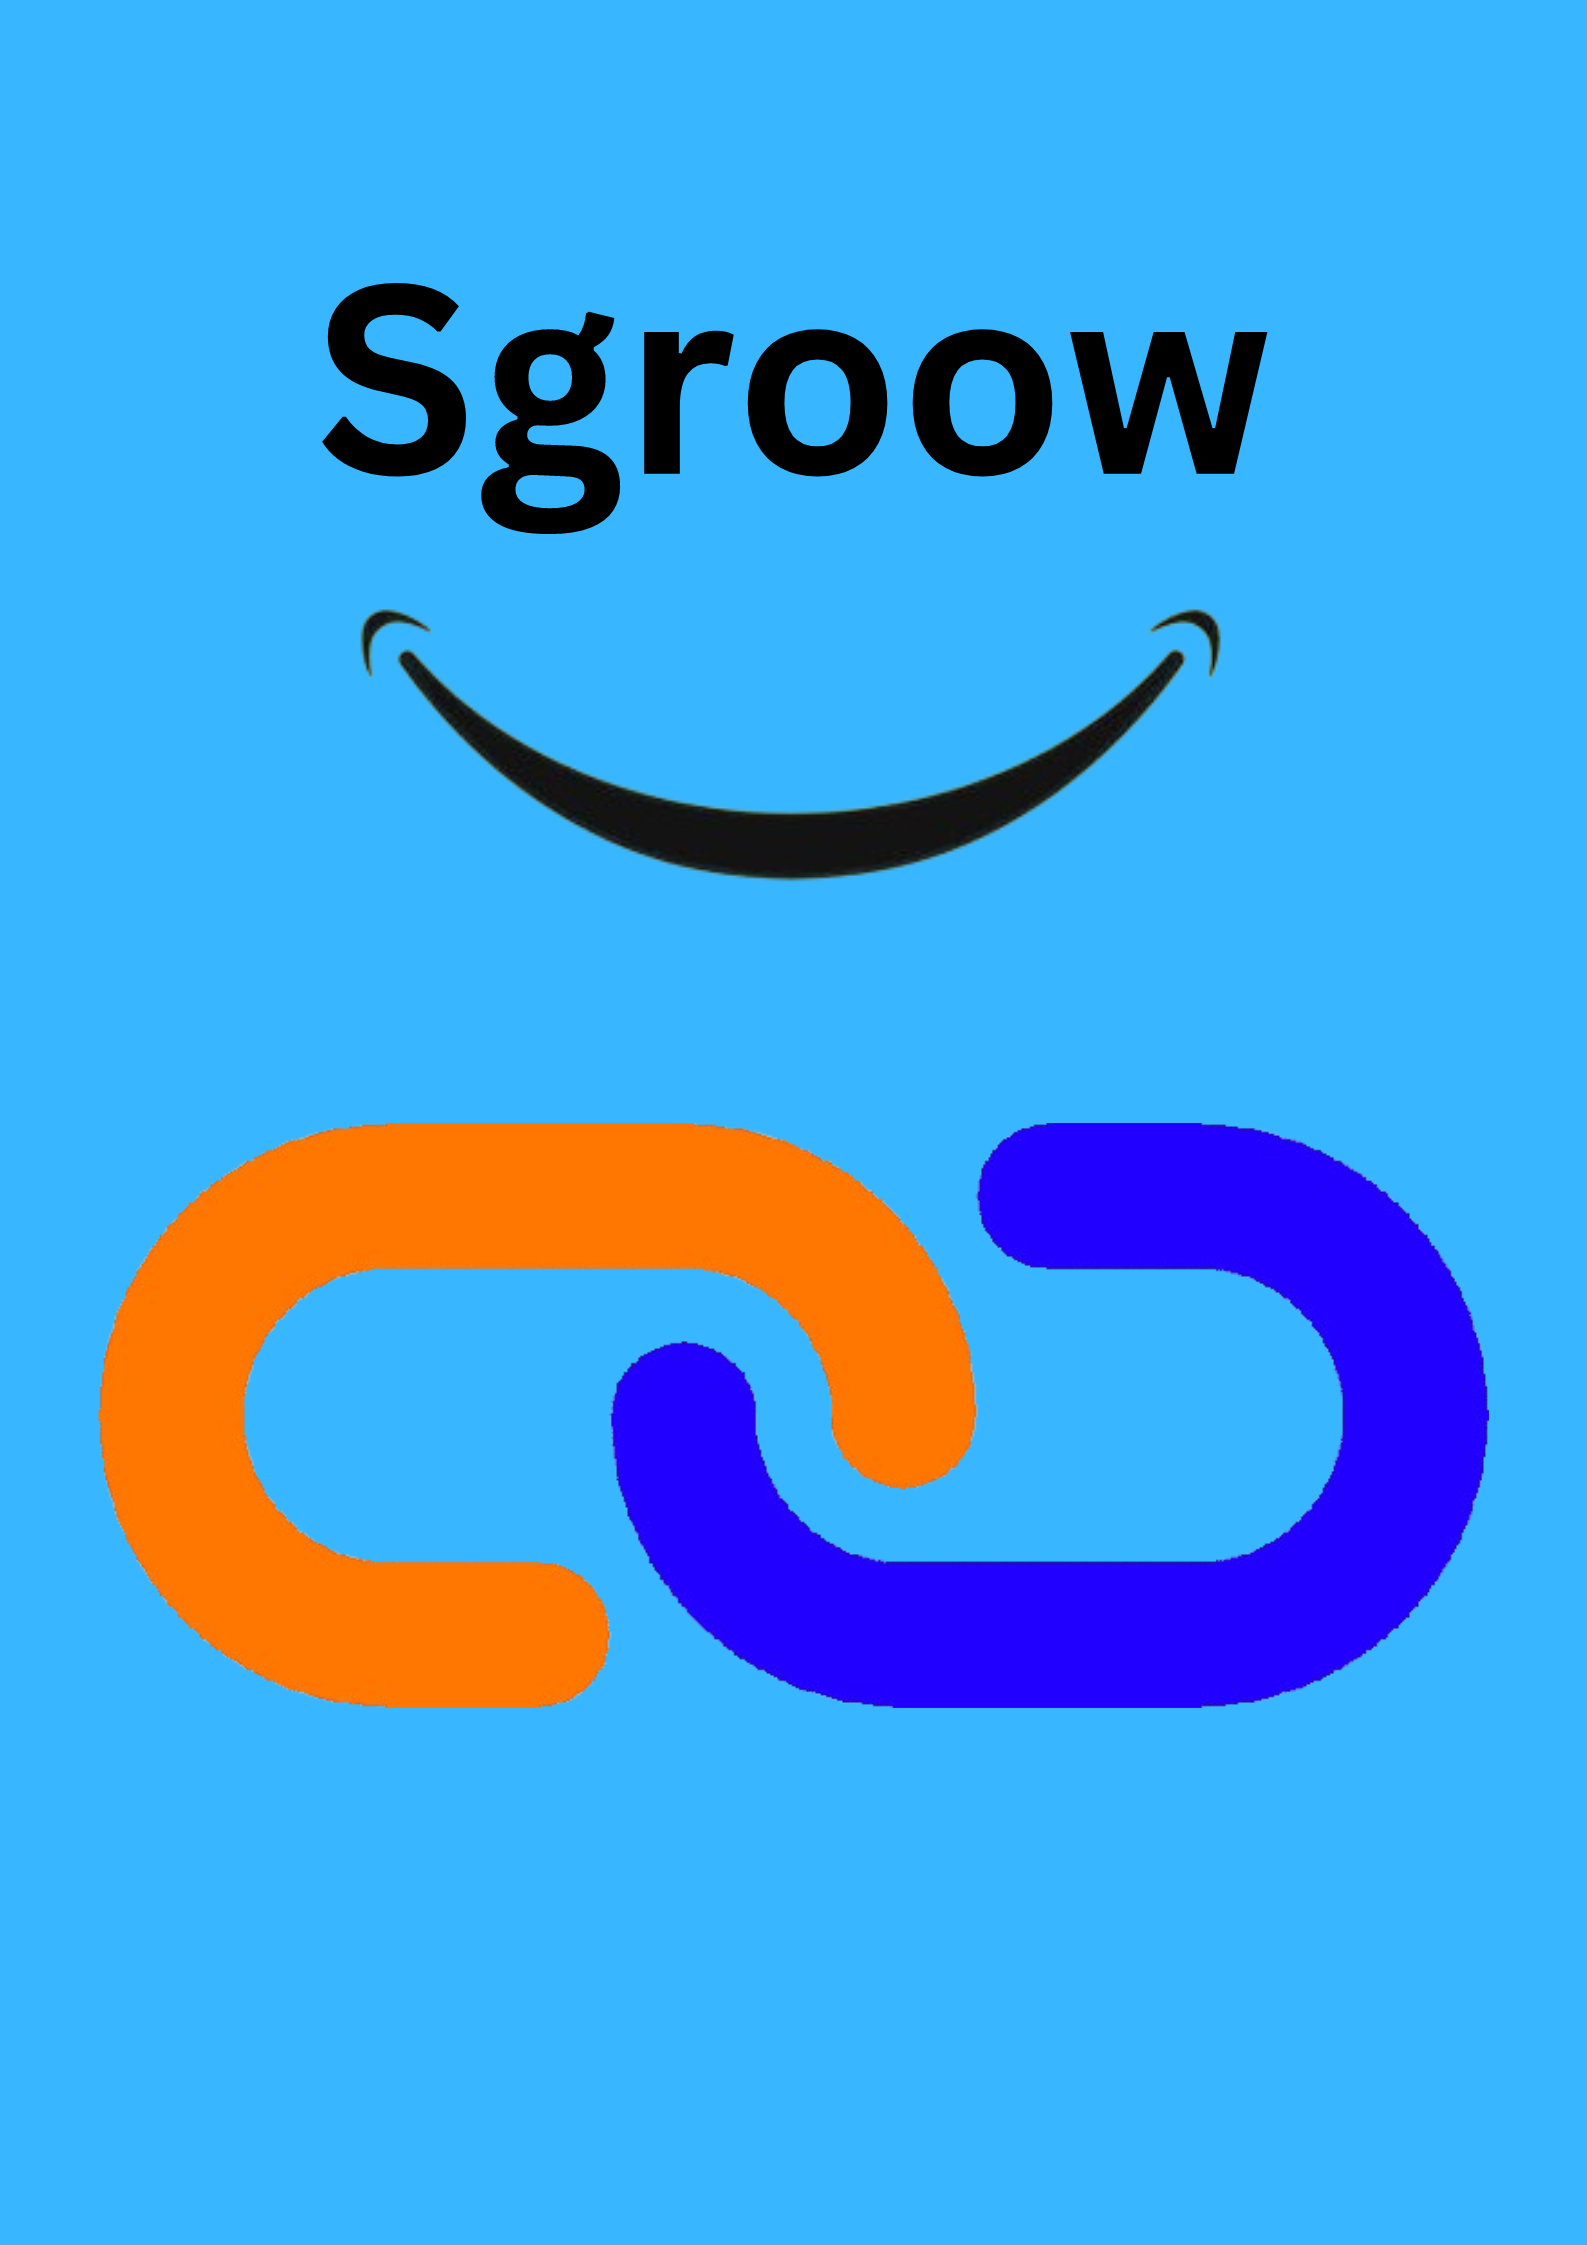 Shayan as Co-founder and CEO of Sgroow